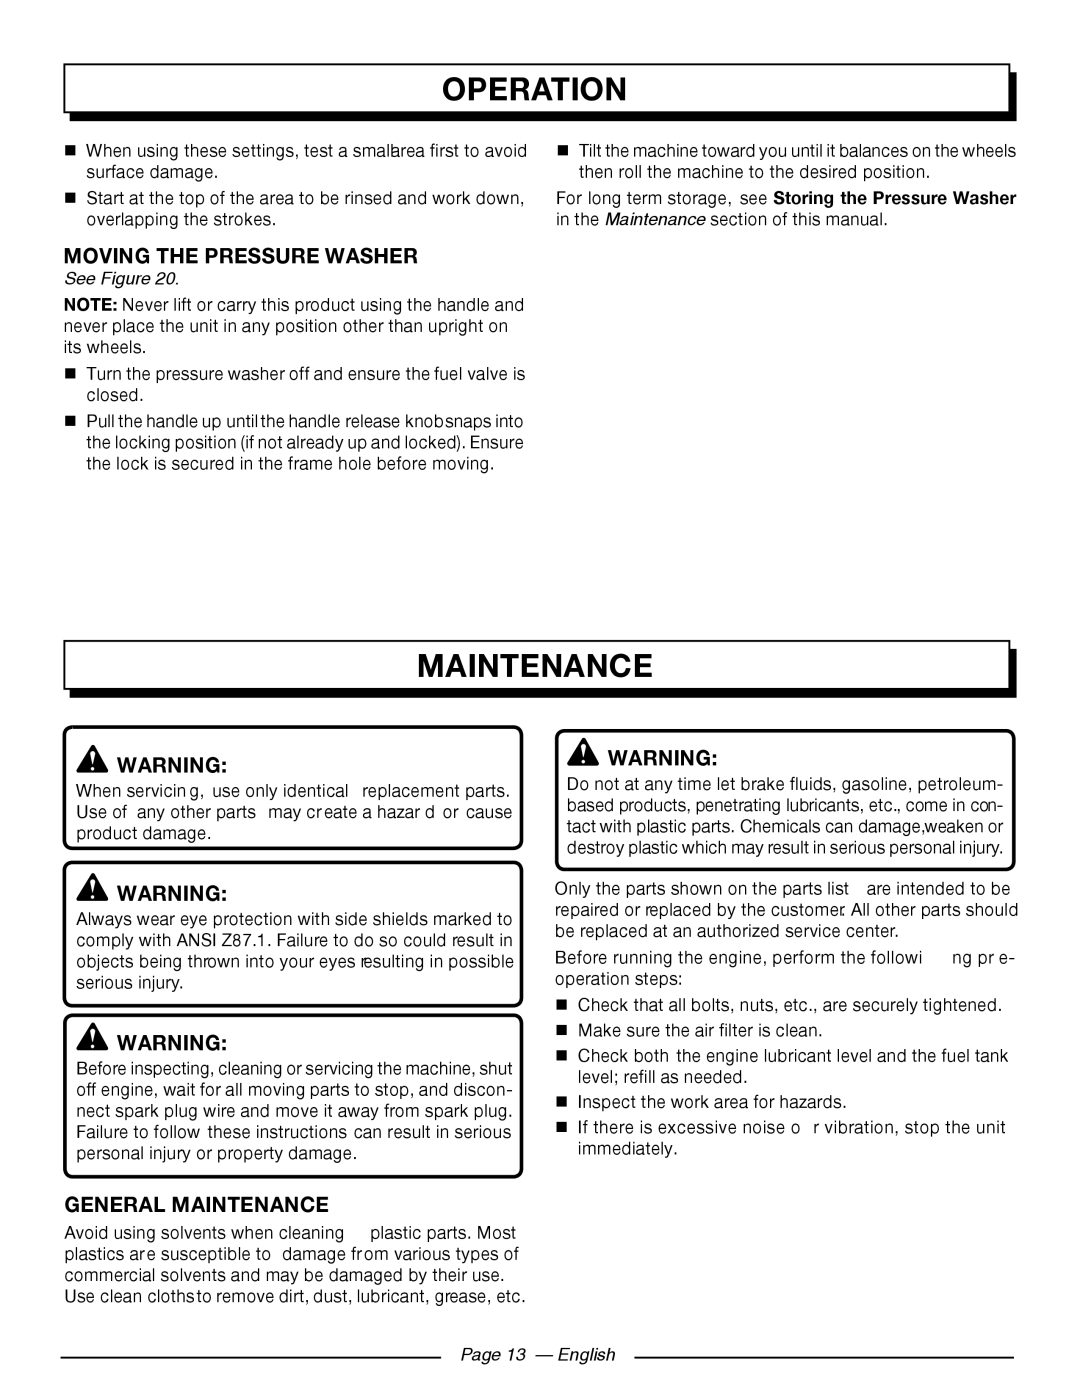 Homelite UT80709, UT80911 Moving The Pressure Washer, General Maintenance, Operation, See Figure, Page 13 - English 